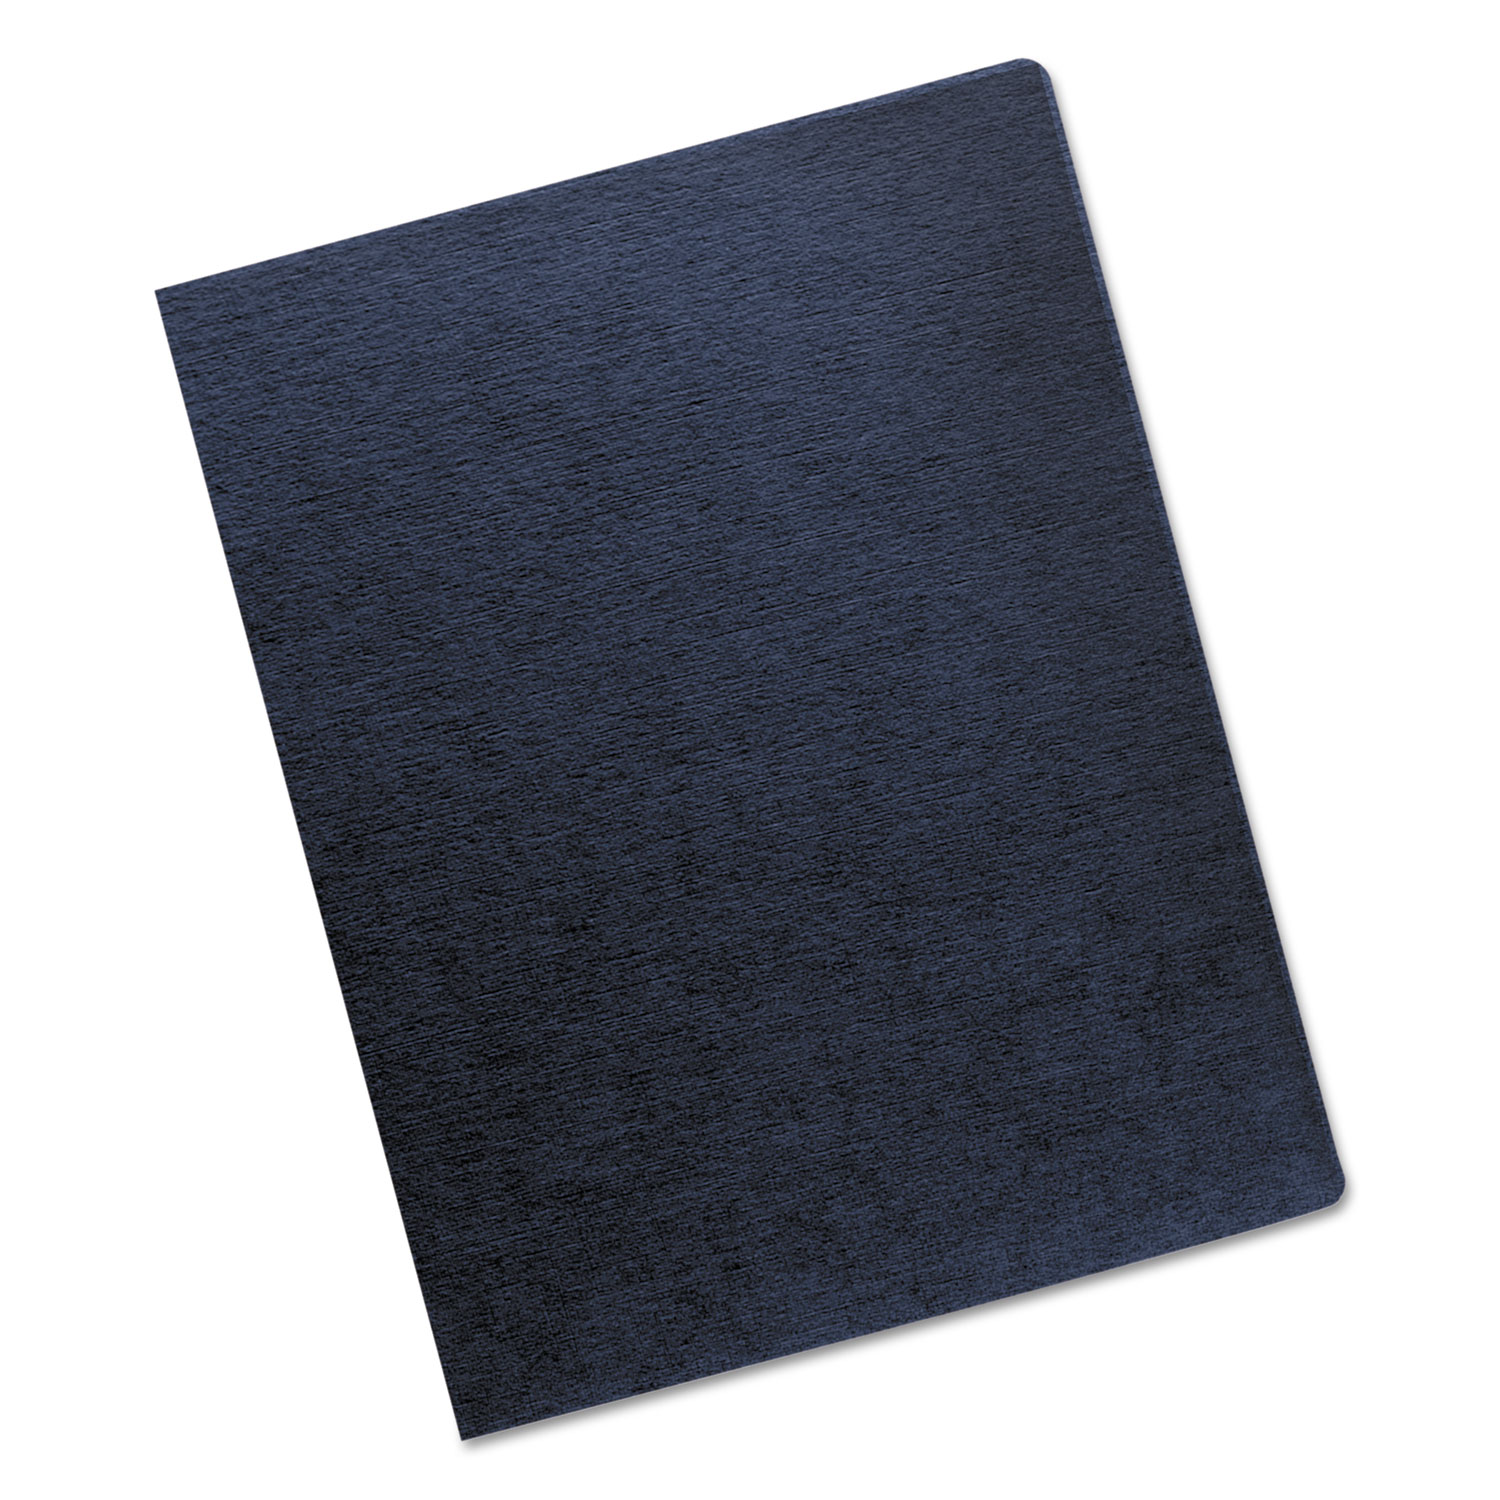  Fellowes 52113 Linen Texture Binding System Covers, 11-1/4 x 8-3/4, Navy, 200/Pack (FEL52113) 